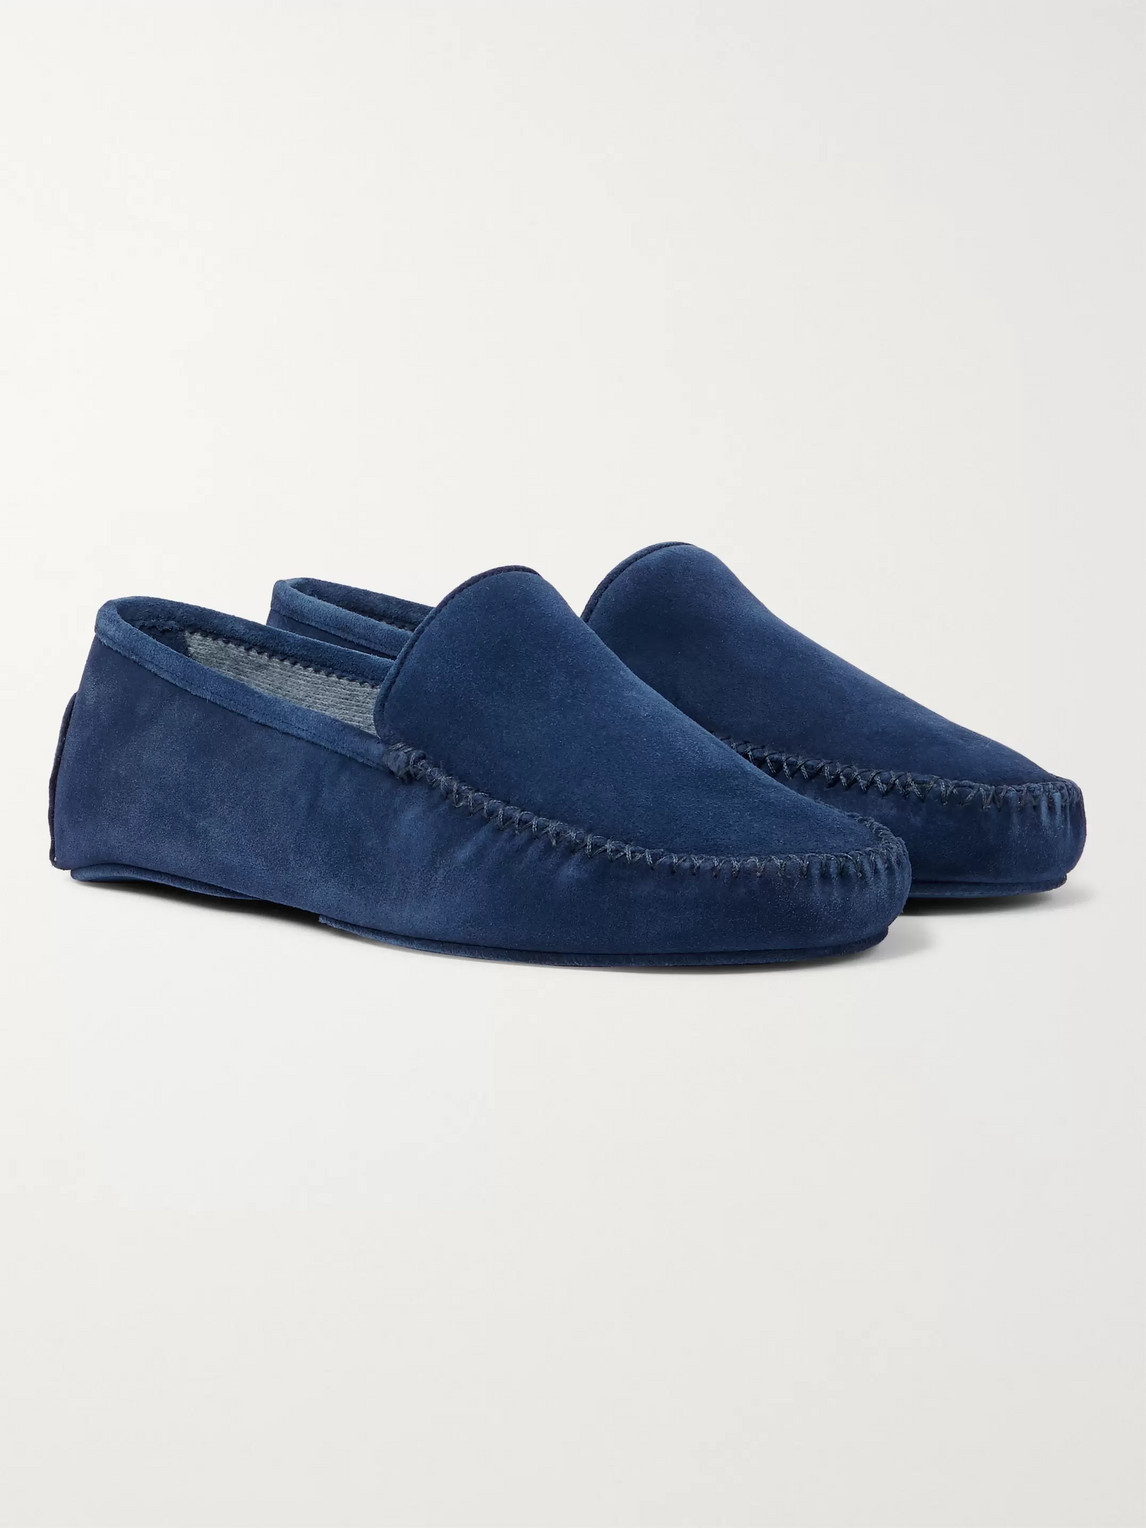 Thom Sweeney Suede Slippers In Blue